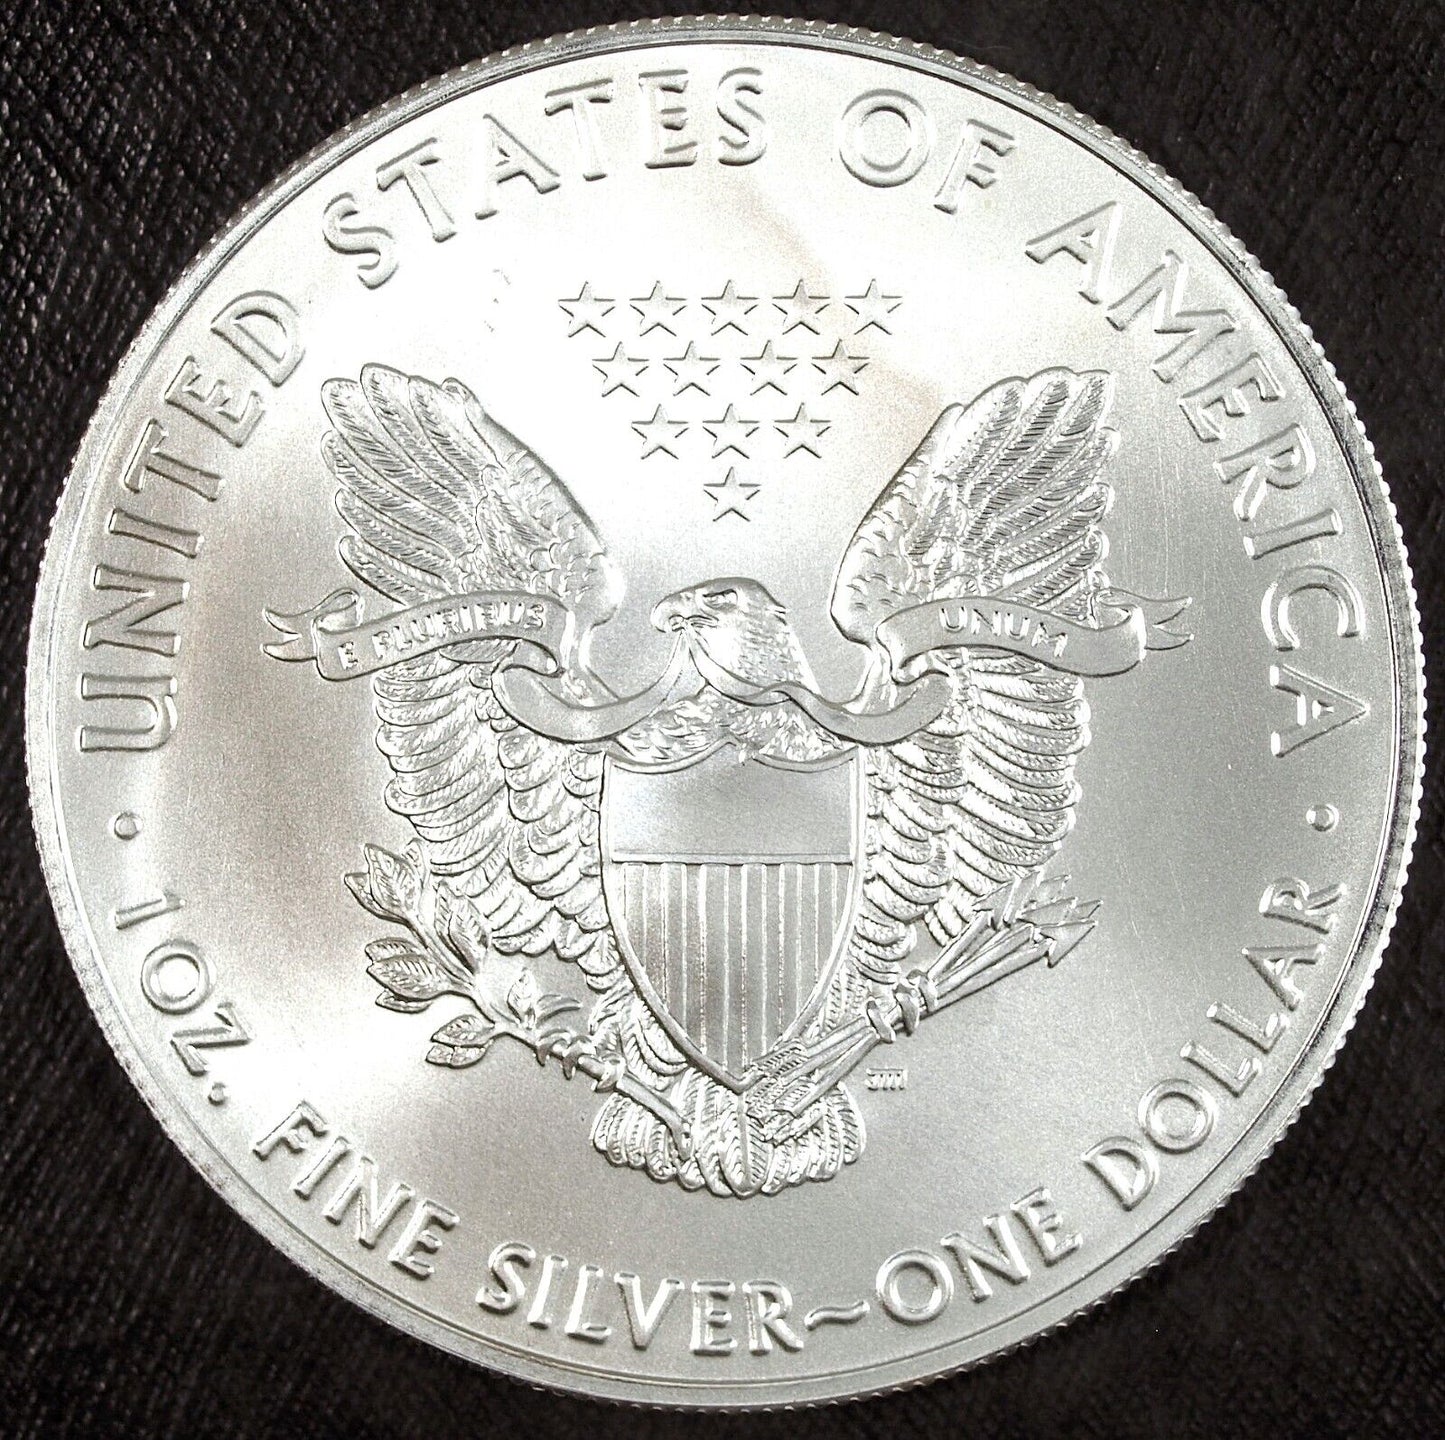 2020 US Mint American Silver Eagle ☆☆ Uncirculated ☆☆ Great Collectible 251